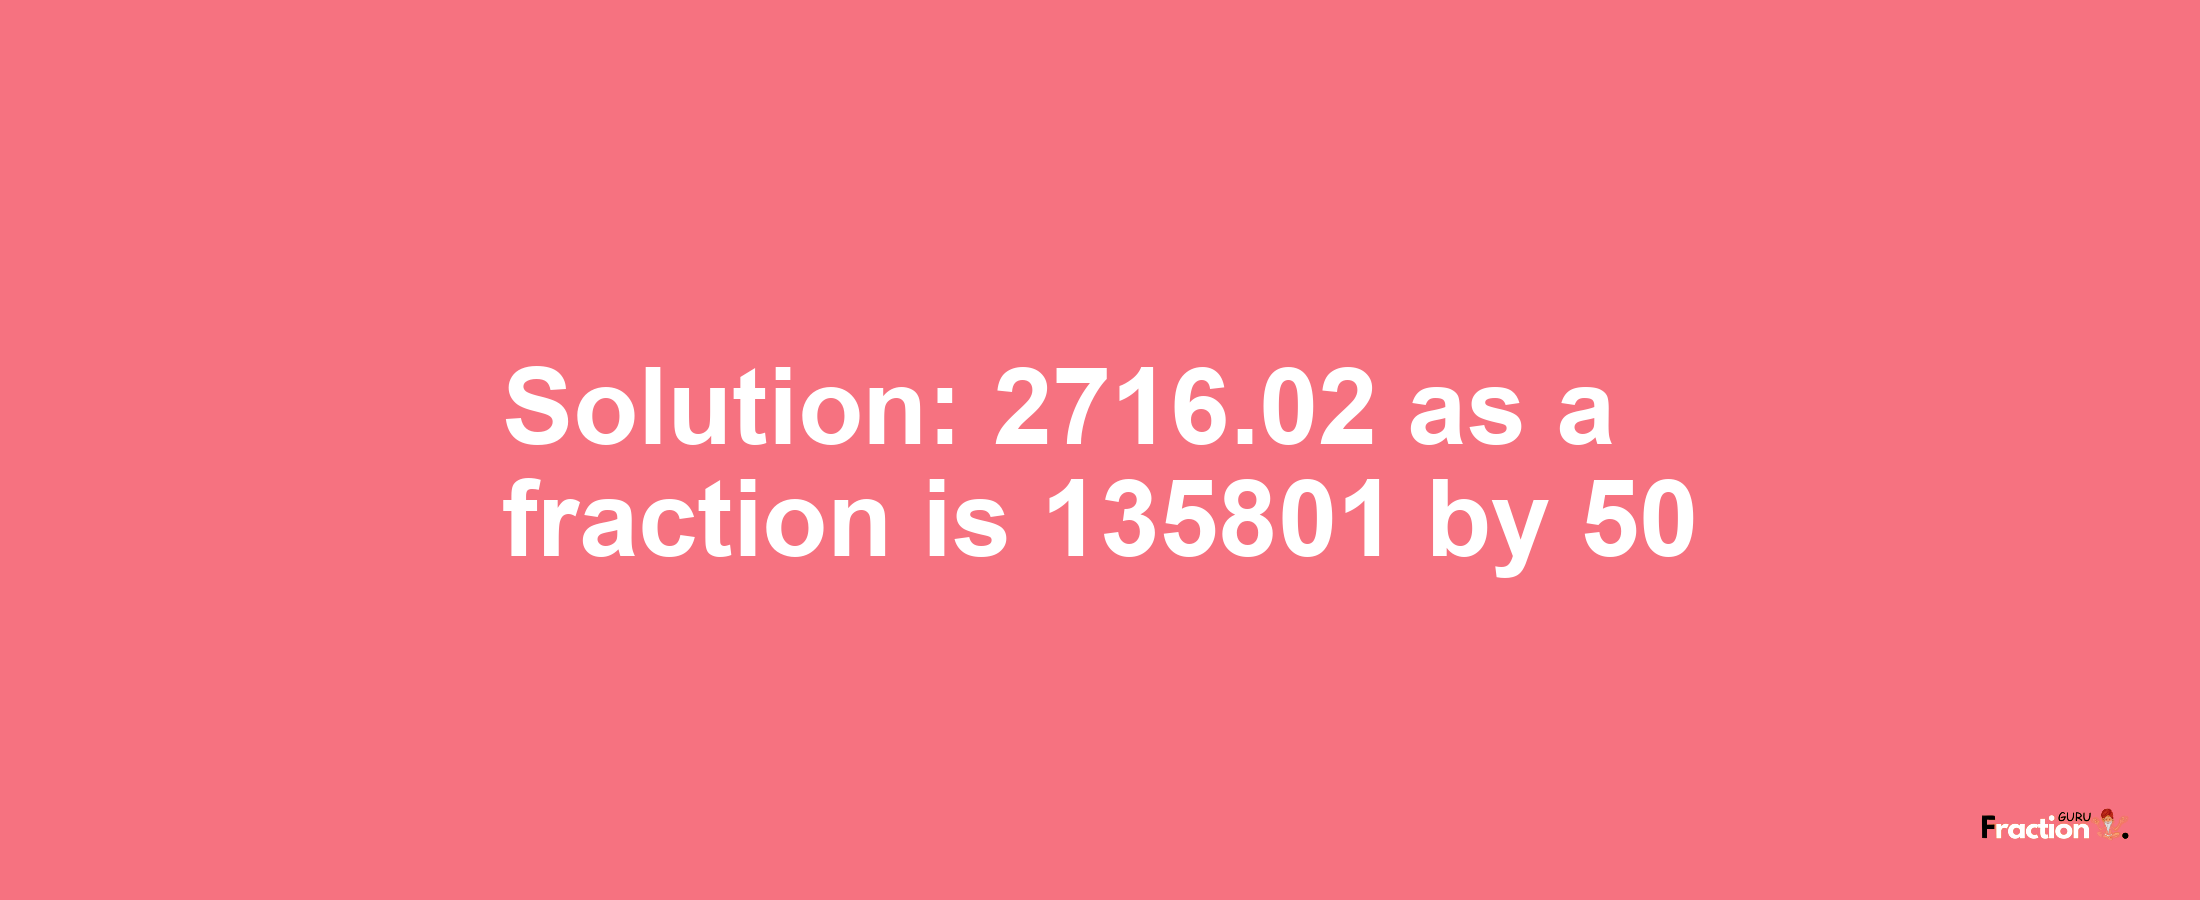 Solution:2716.02 as a fraction is 135801/50